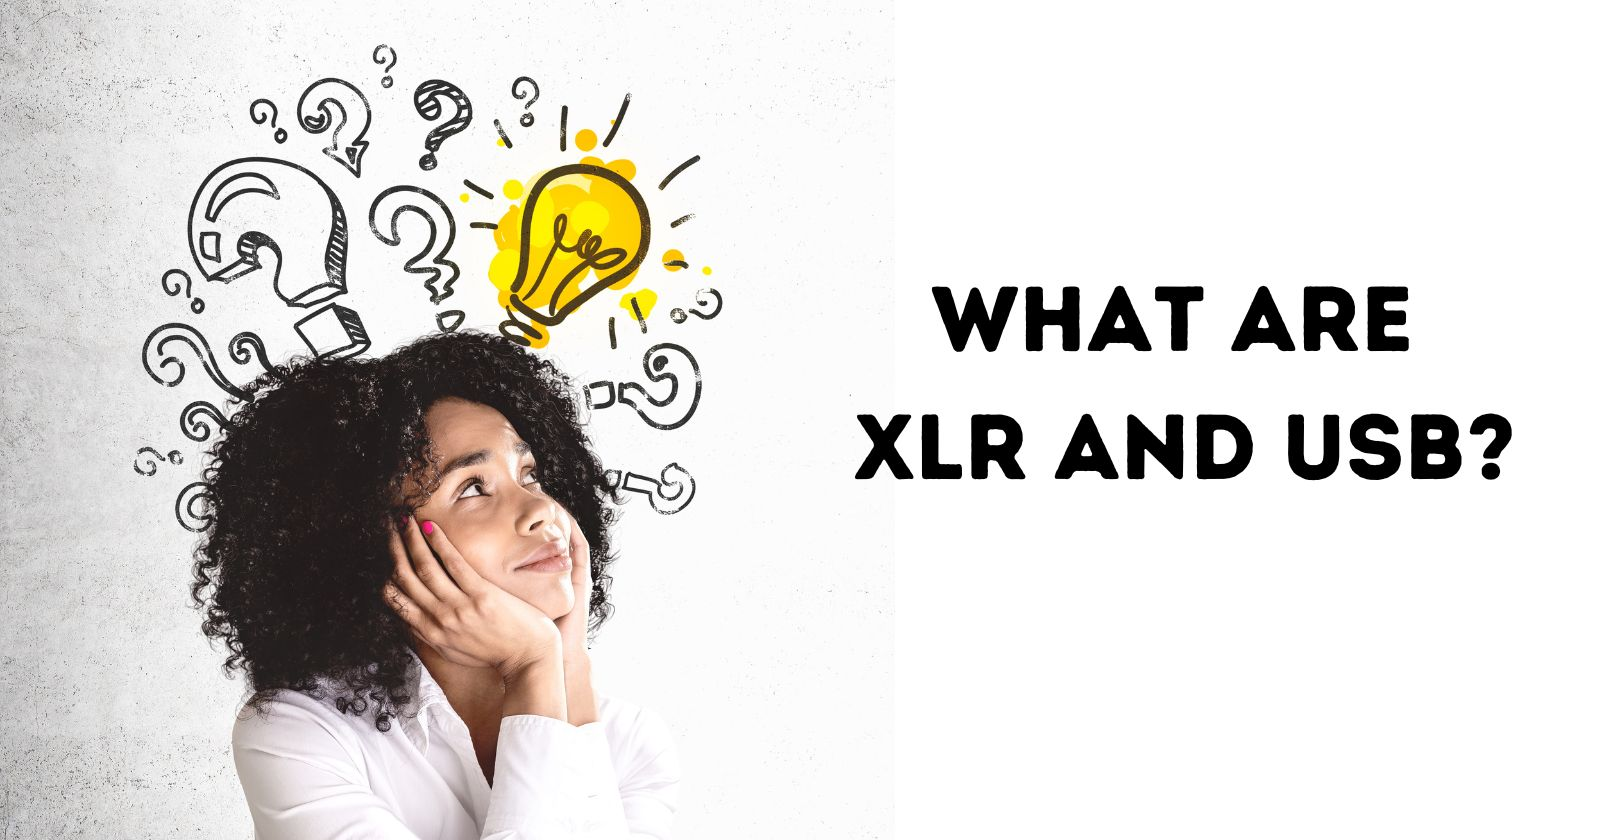 Girl is thinking "What are XLR and USB"